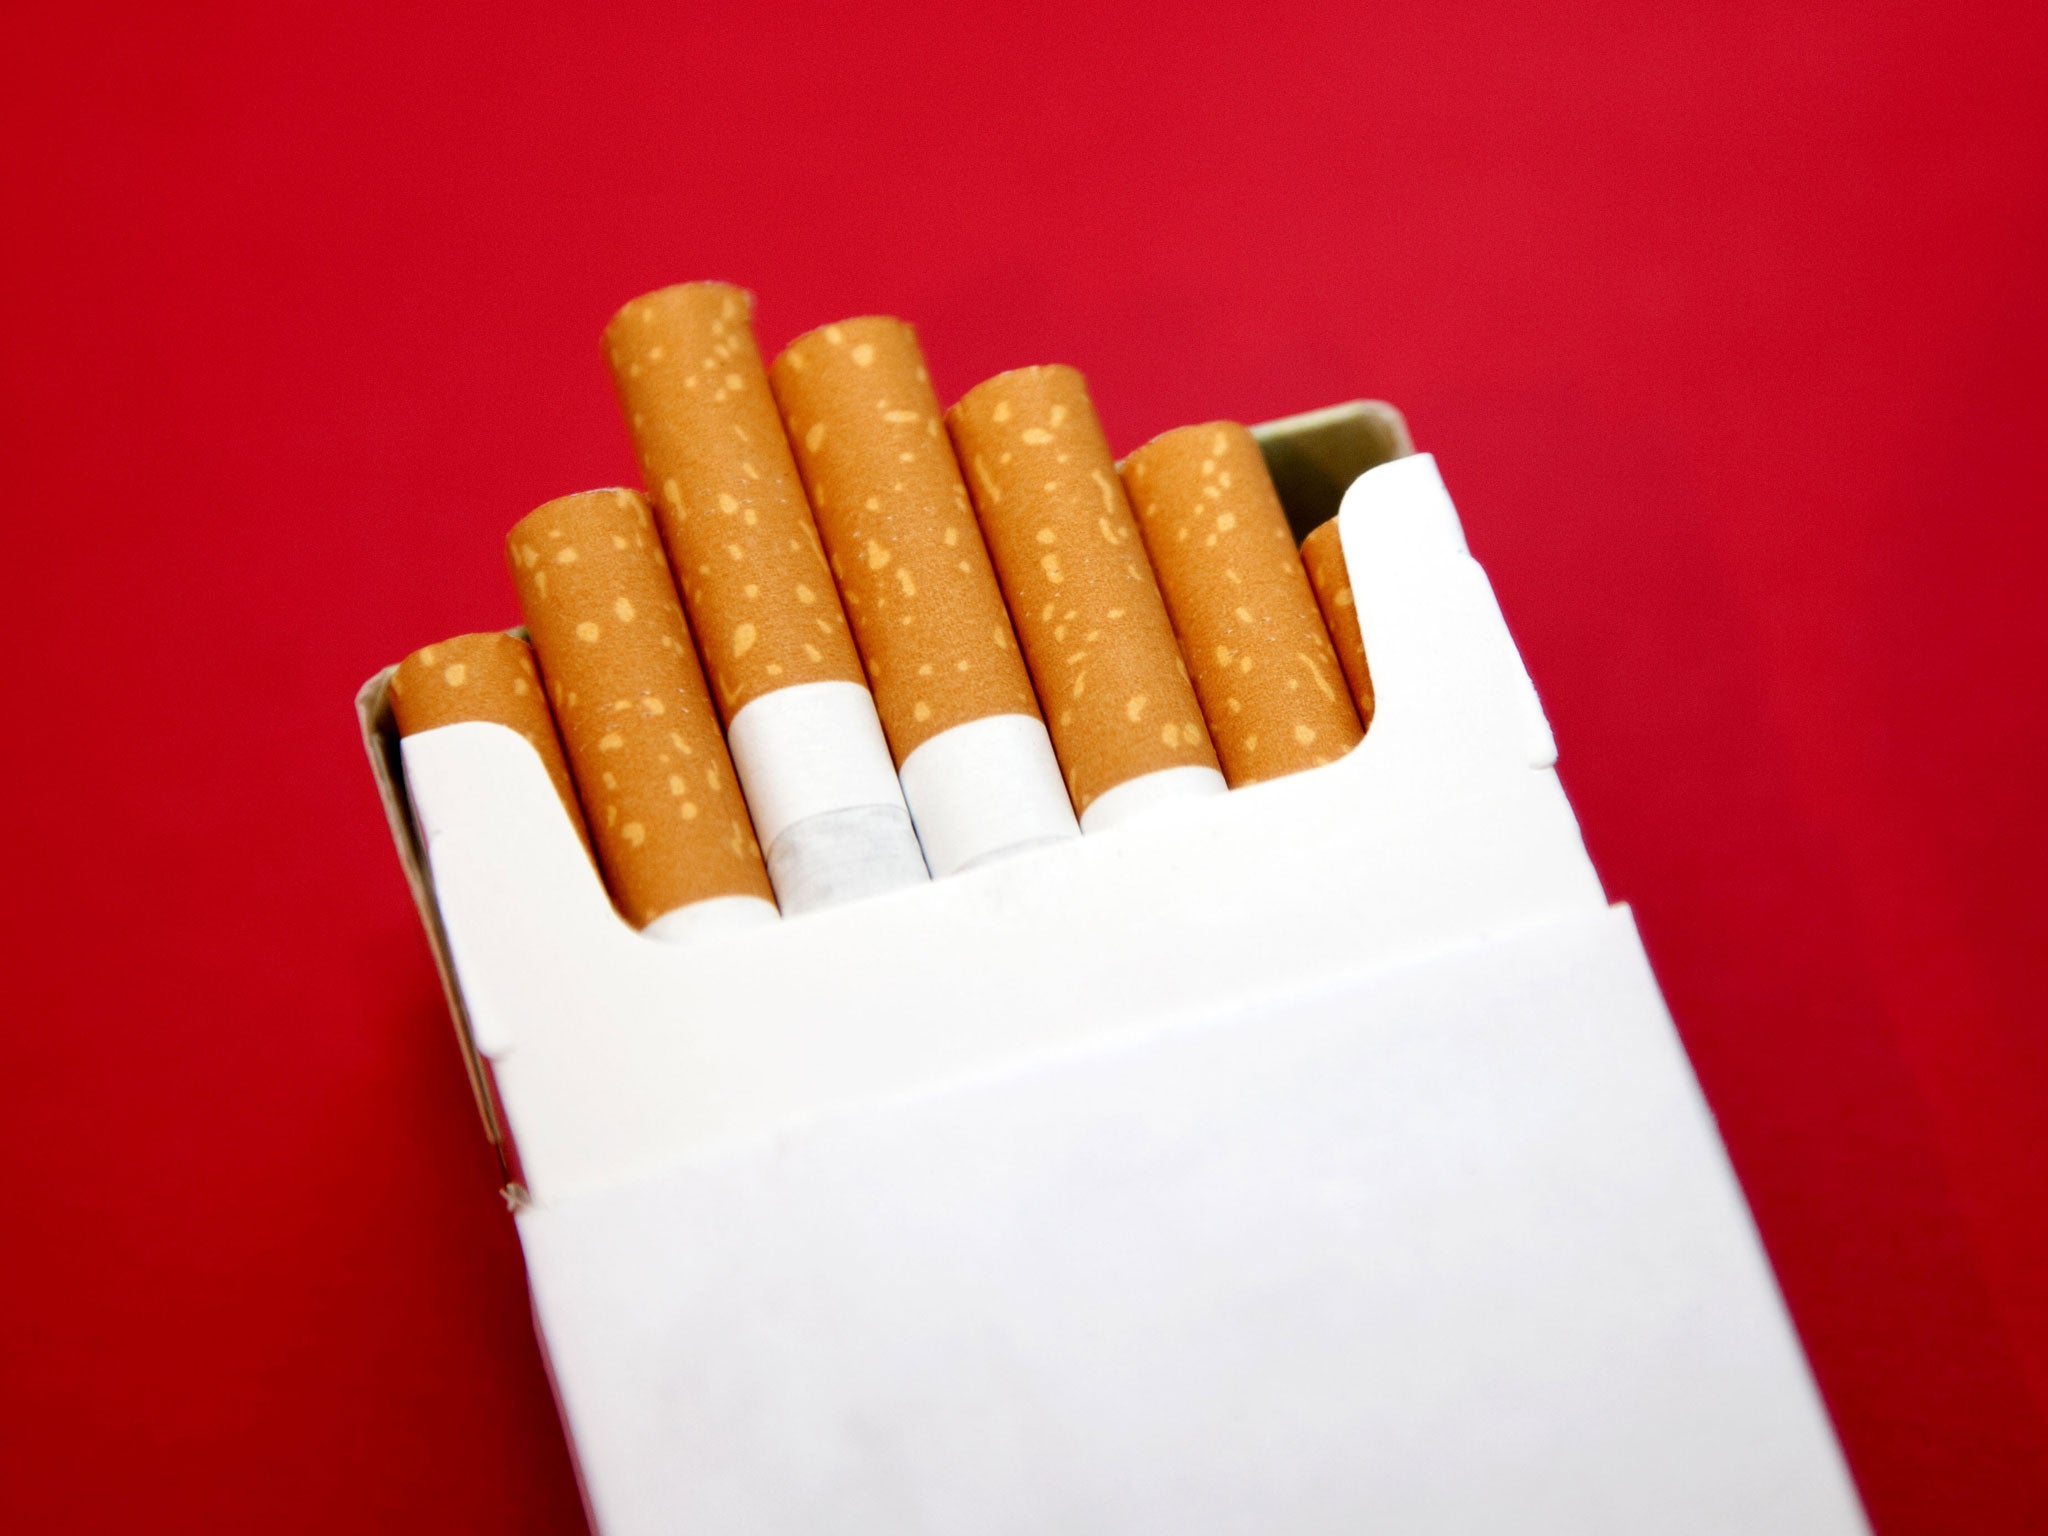 Public Health England say plain packaging for cigarettes is the right policy to adopt